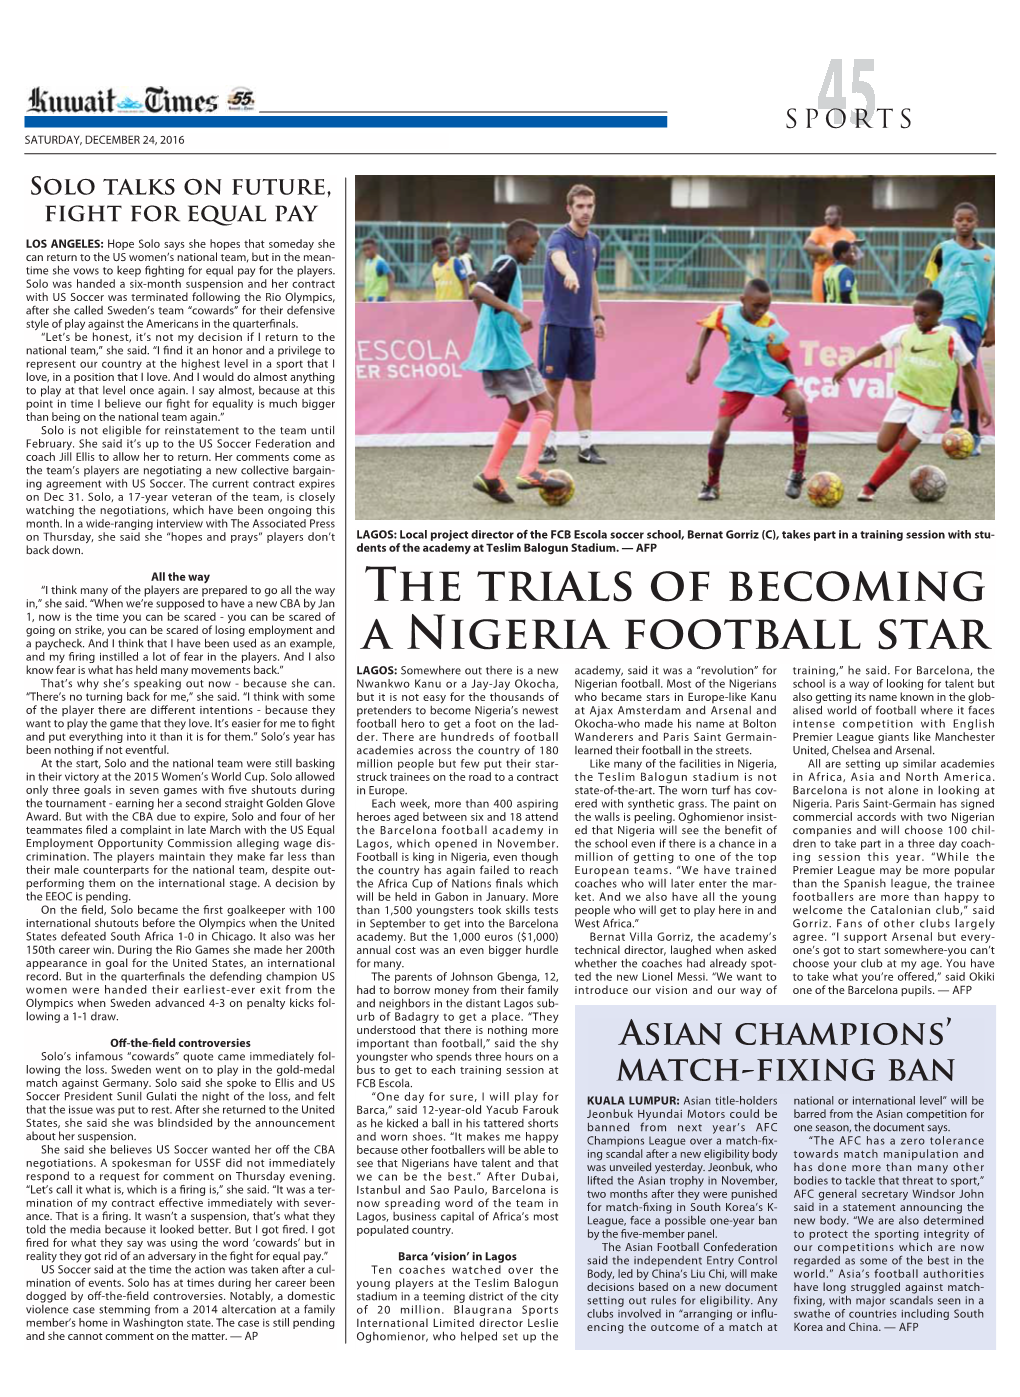 The Trials of Becoming a Nigeria Football Star